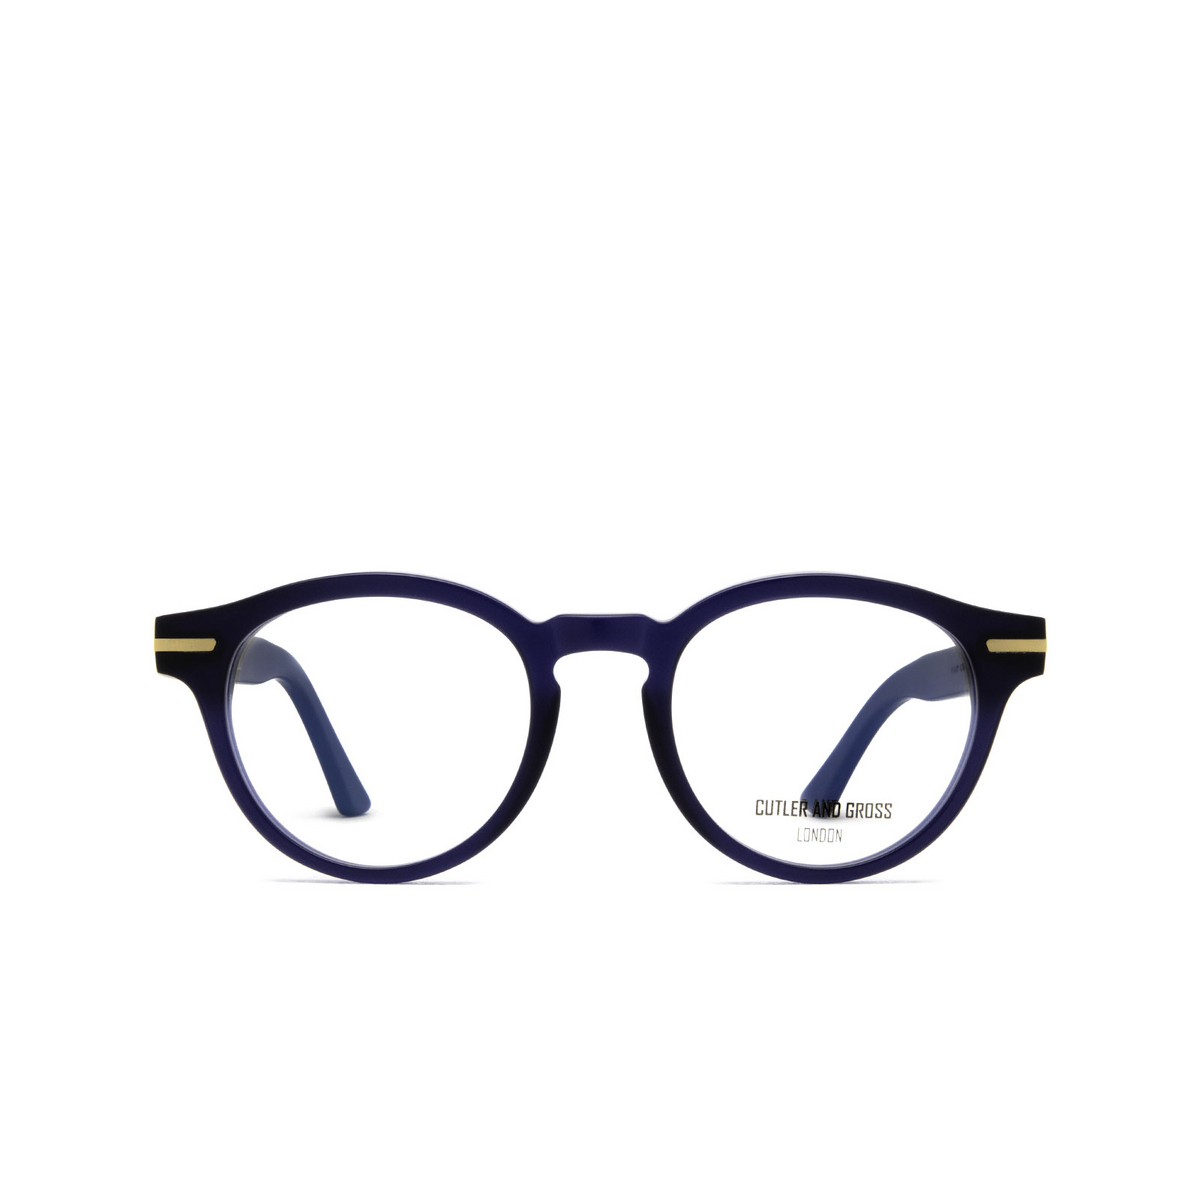 Cutler and Gross 1338 Eyeglasses 03 Classic Navy Blue - front view